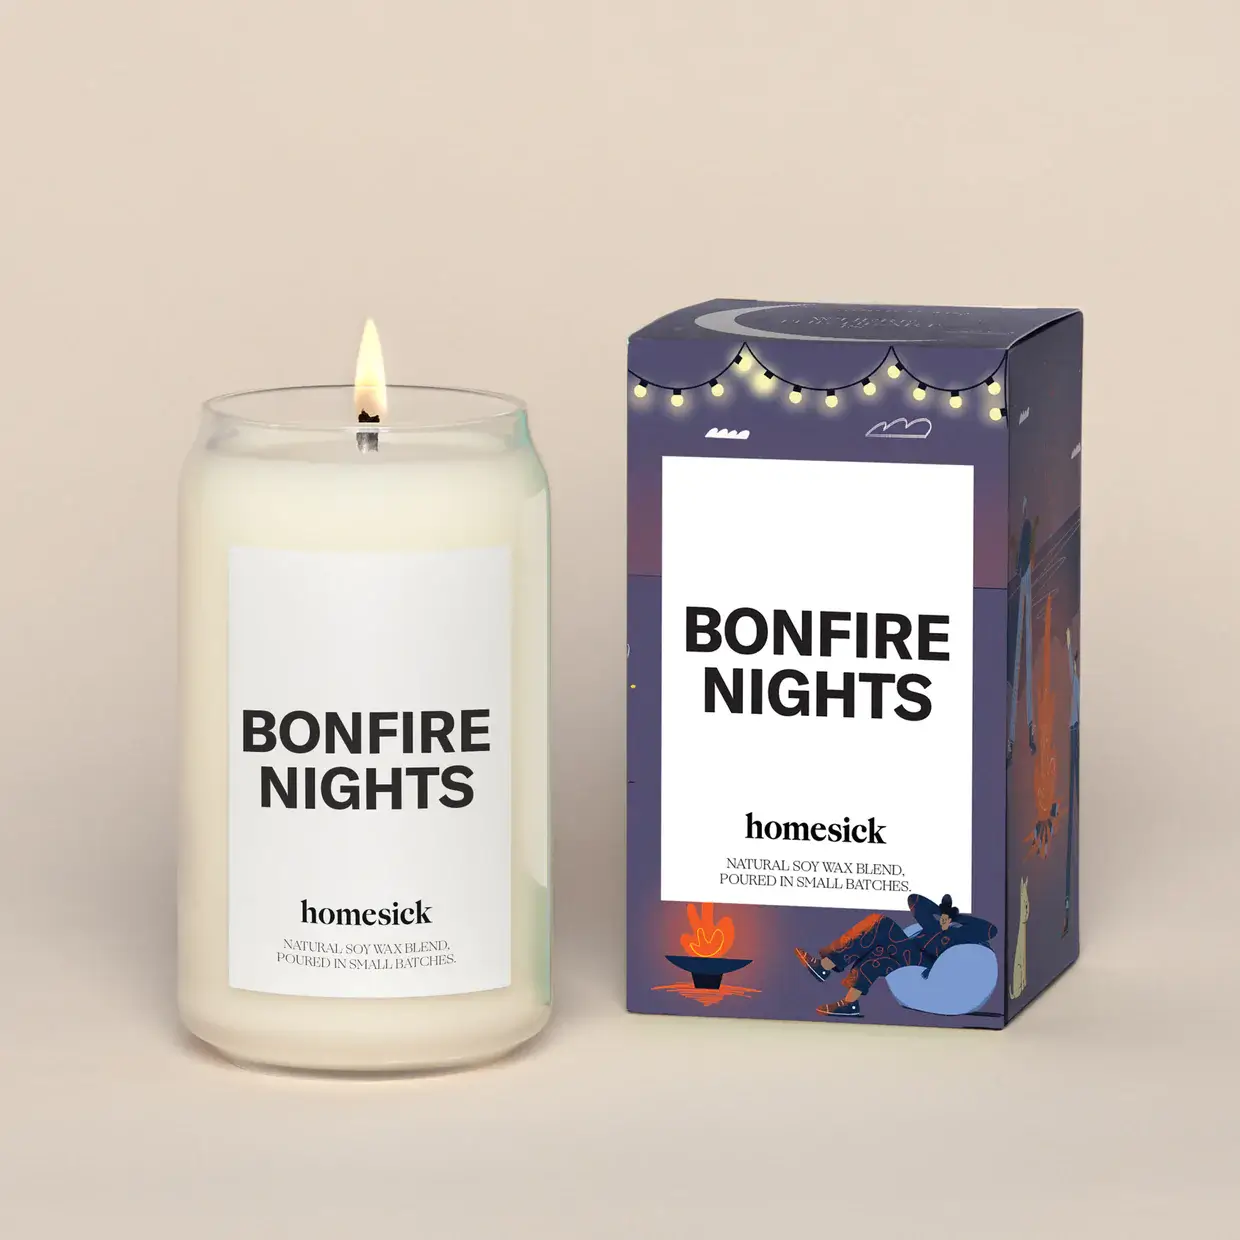 Homesick "Bonfire Nights" Premium Scented Candle